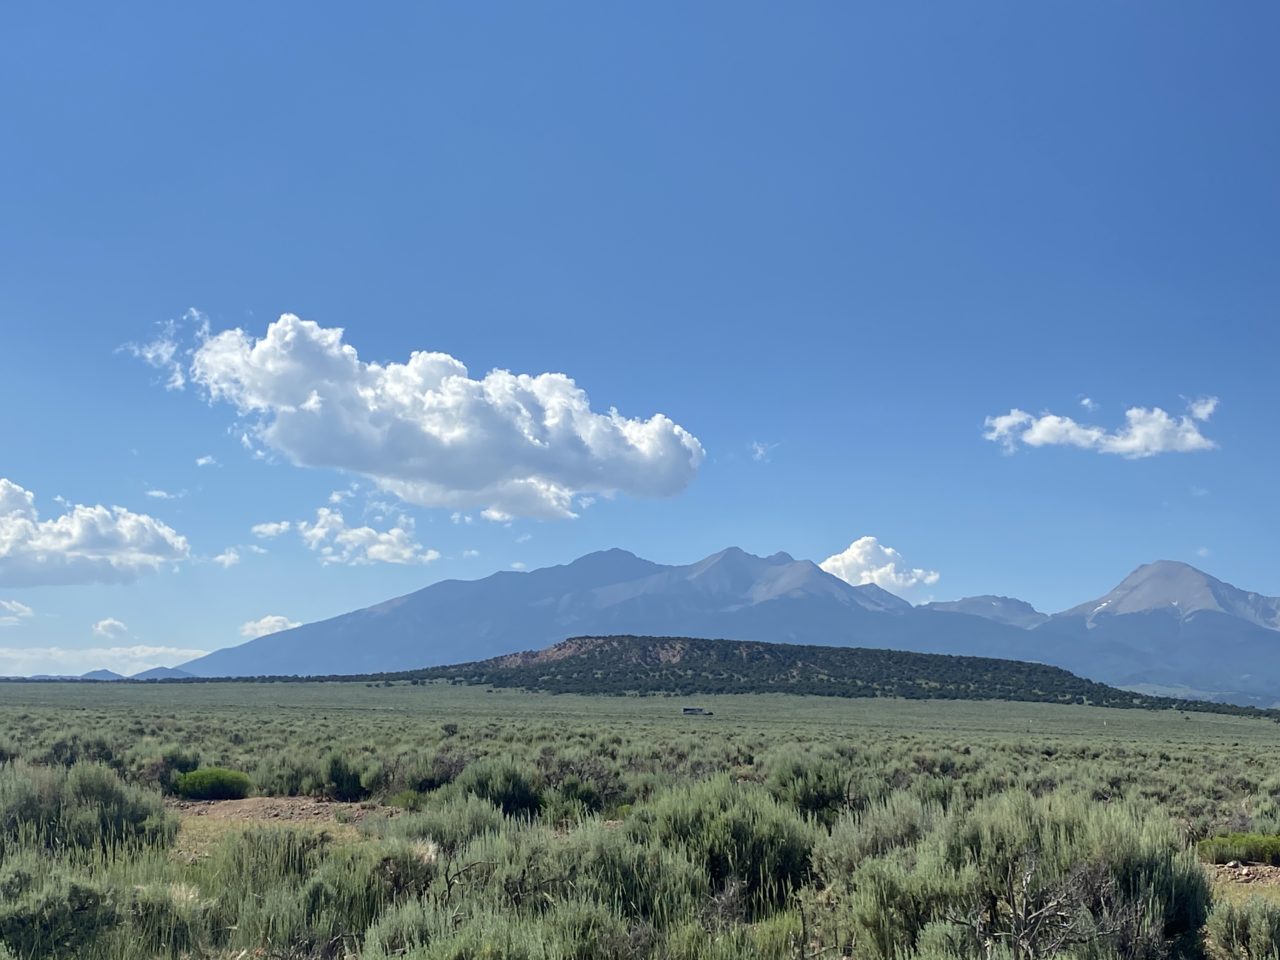 Just what The Doctor Ordered! 5 Acres Close to the Mountains only $300 Mo